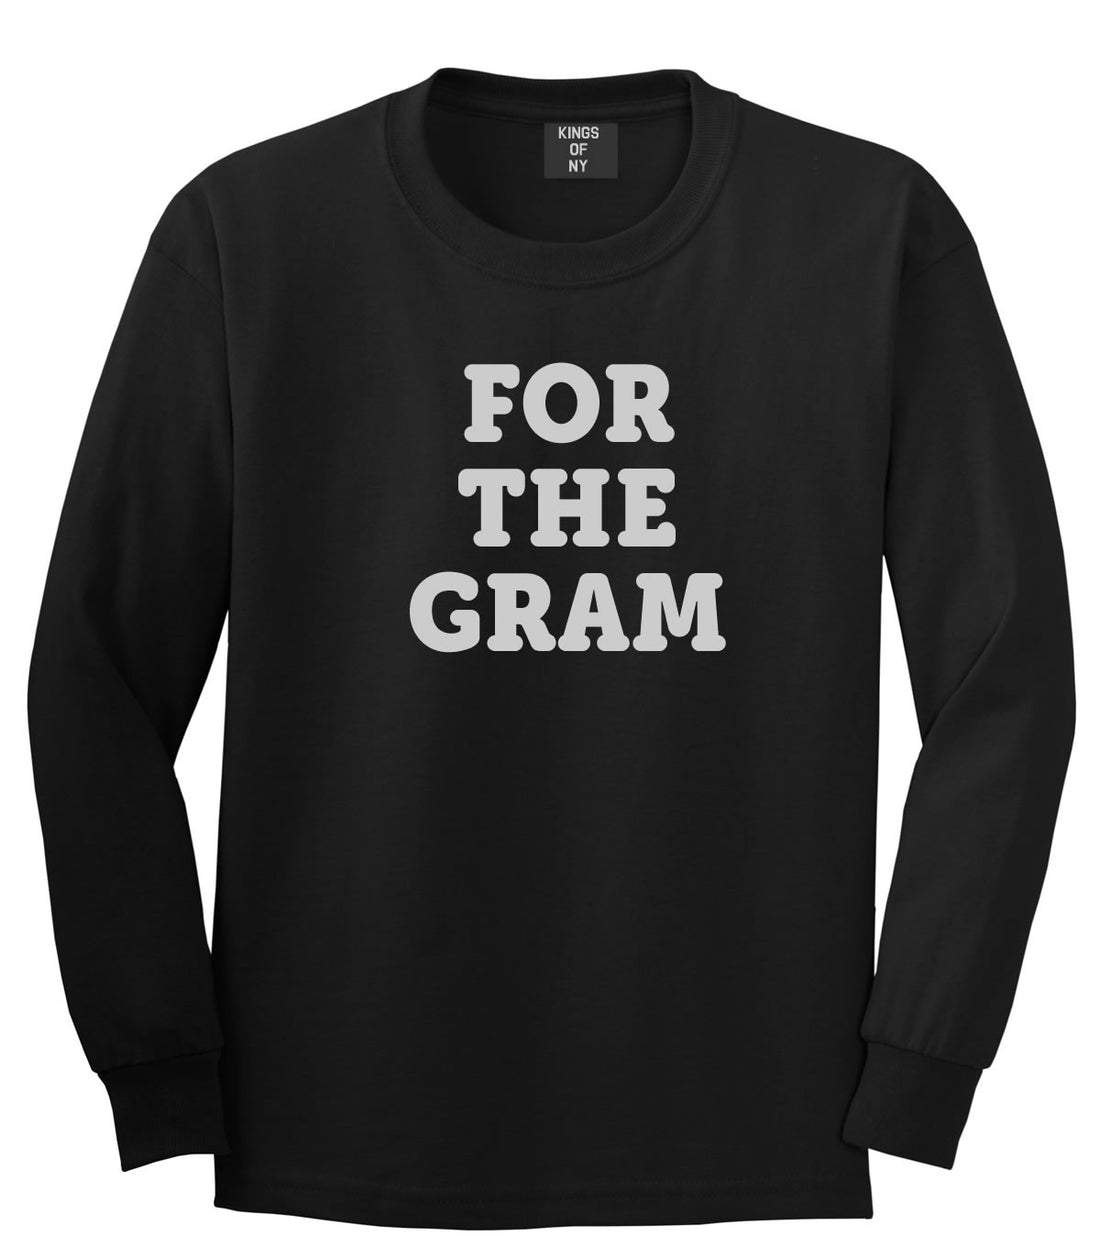 Do It For The Gram Long Sleeve T-Shirt by Kings Of NY